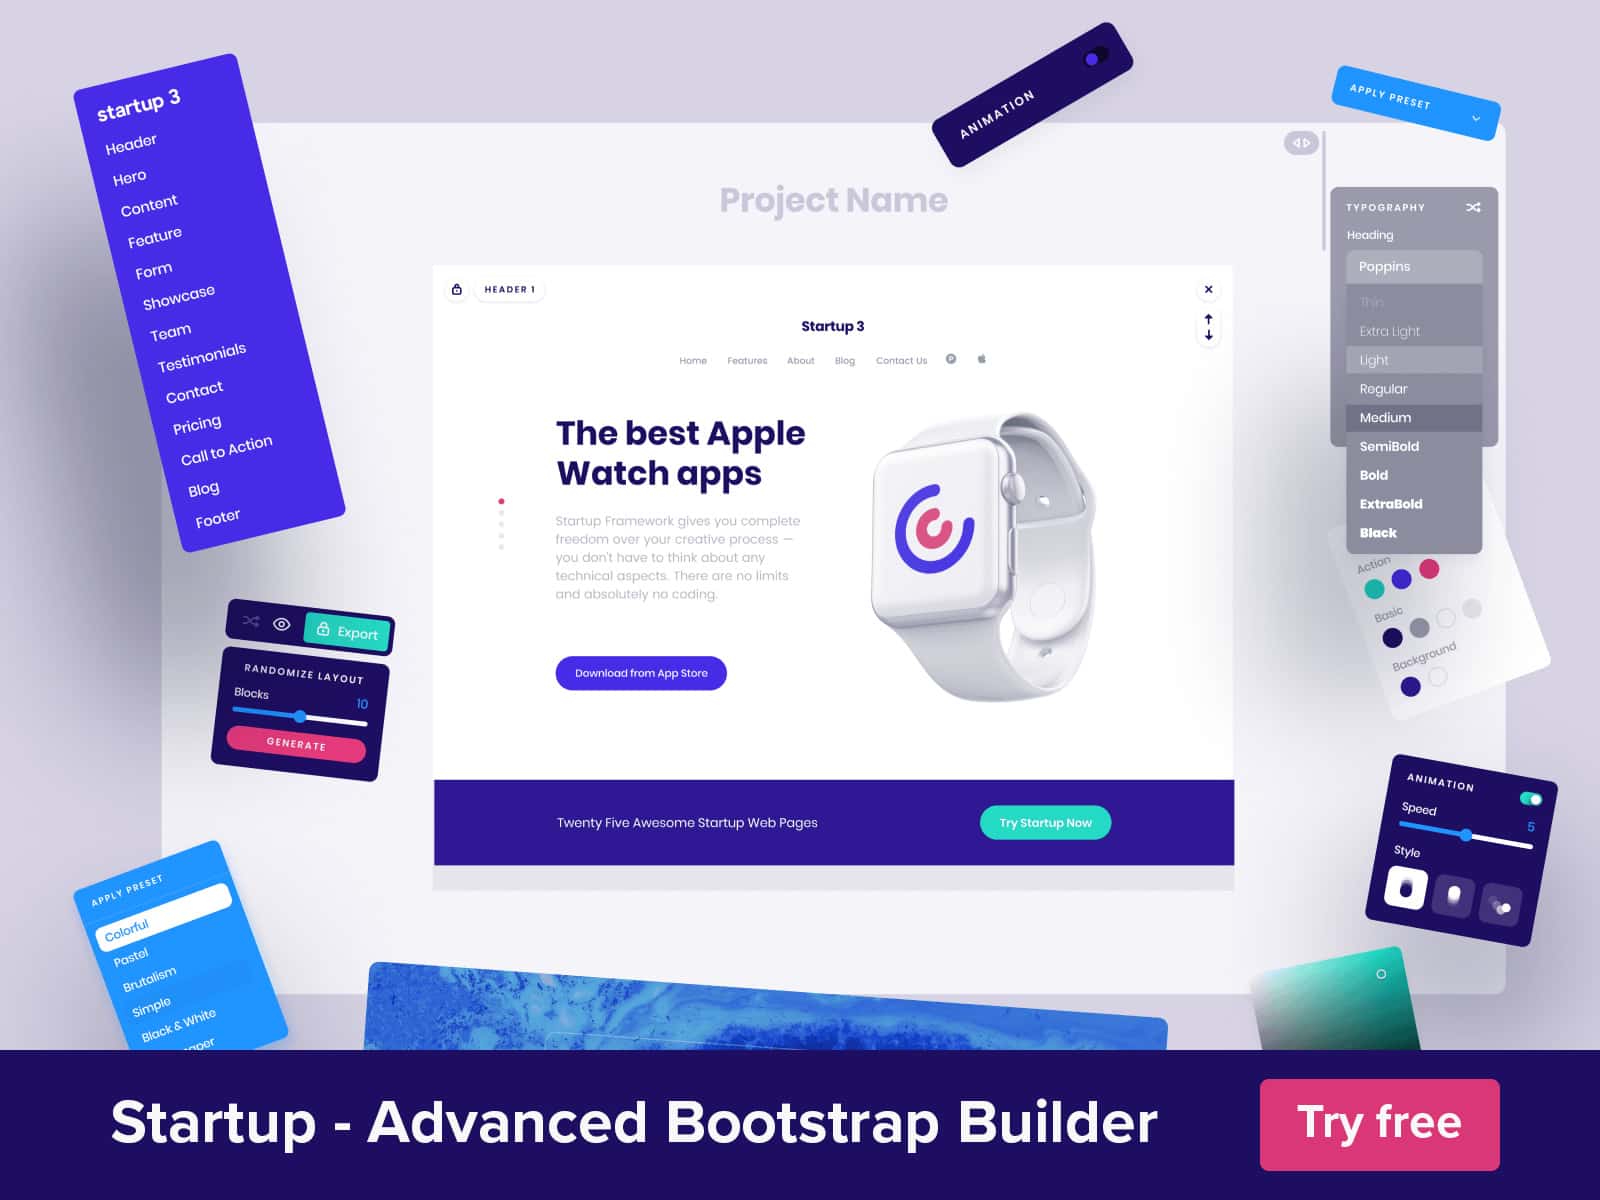 Bootstrap Grid System Guide: Examples, Tutorials, and Tricks - Designmodo